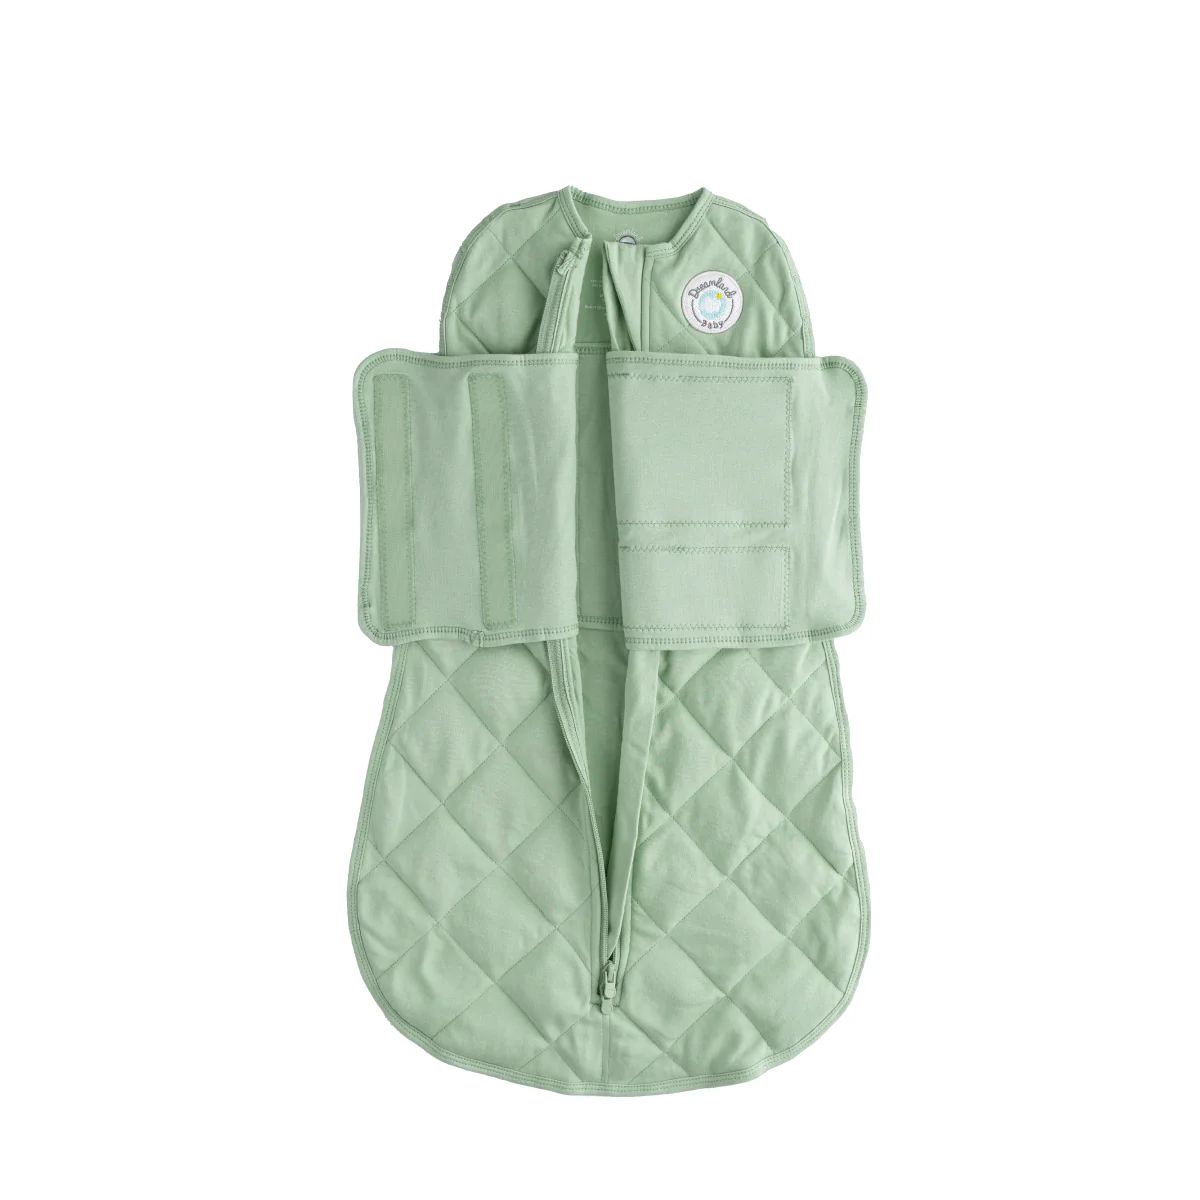 Dream Weighted Sleep Swaddle | Dreamland Baby